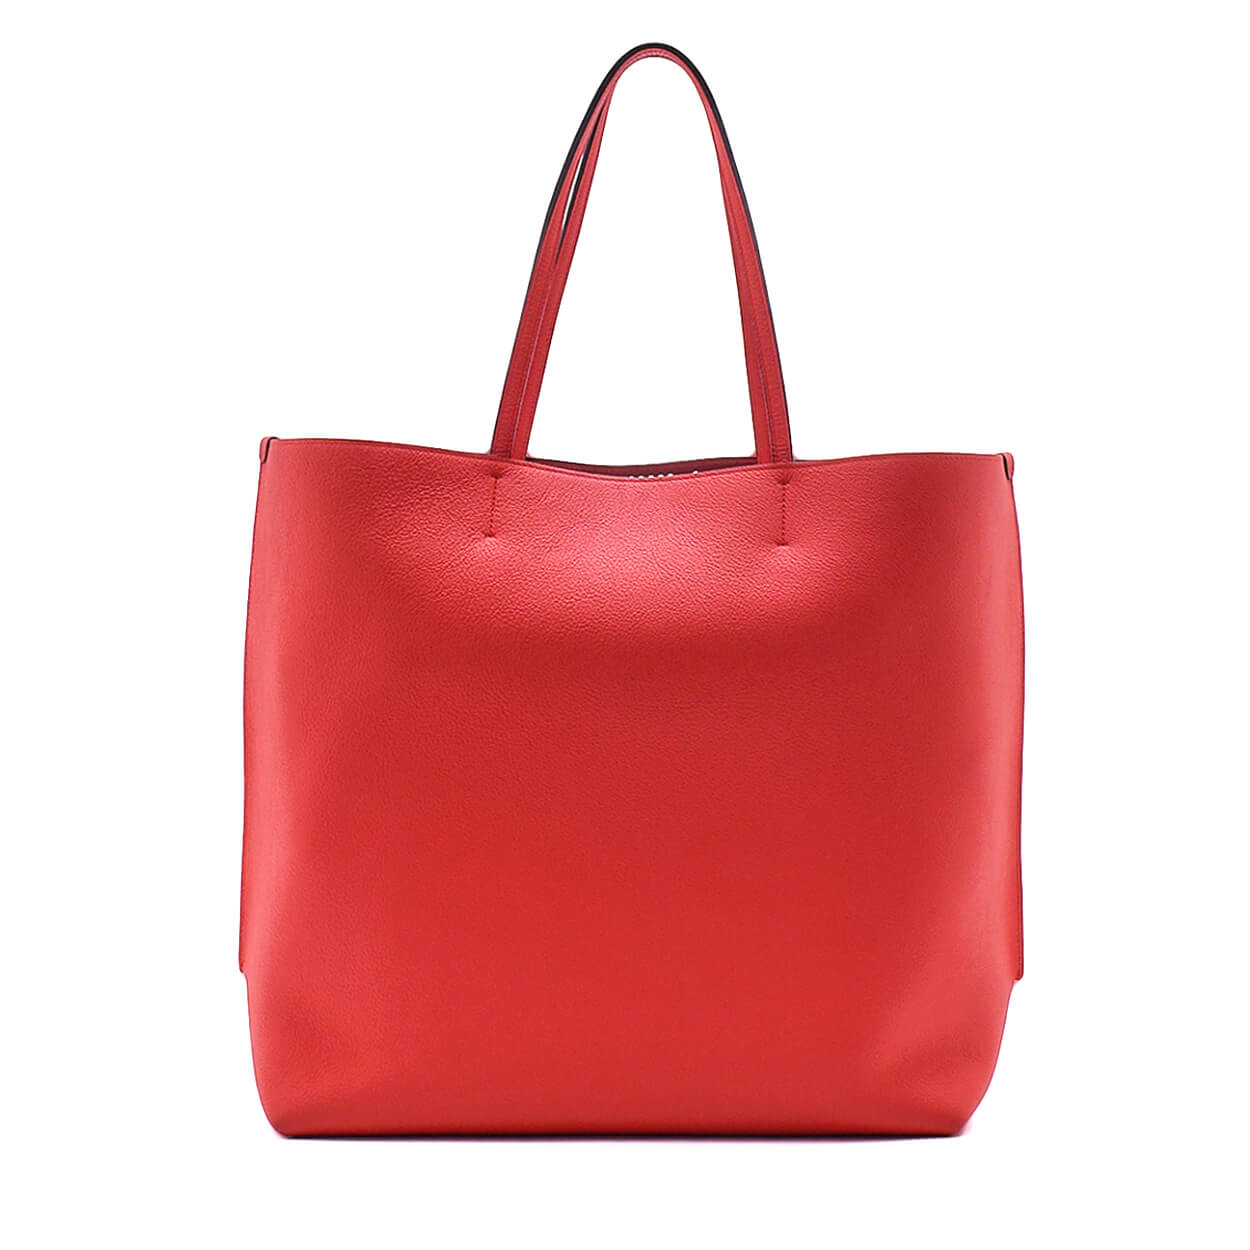 Christian Dior - Red Perforated Cannage Leather Dioriva Tote Bag